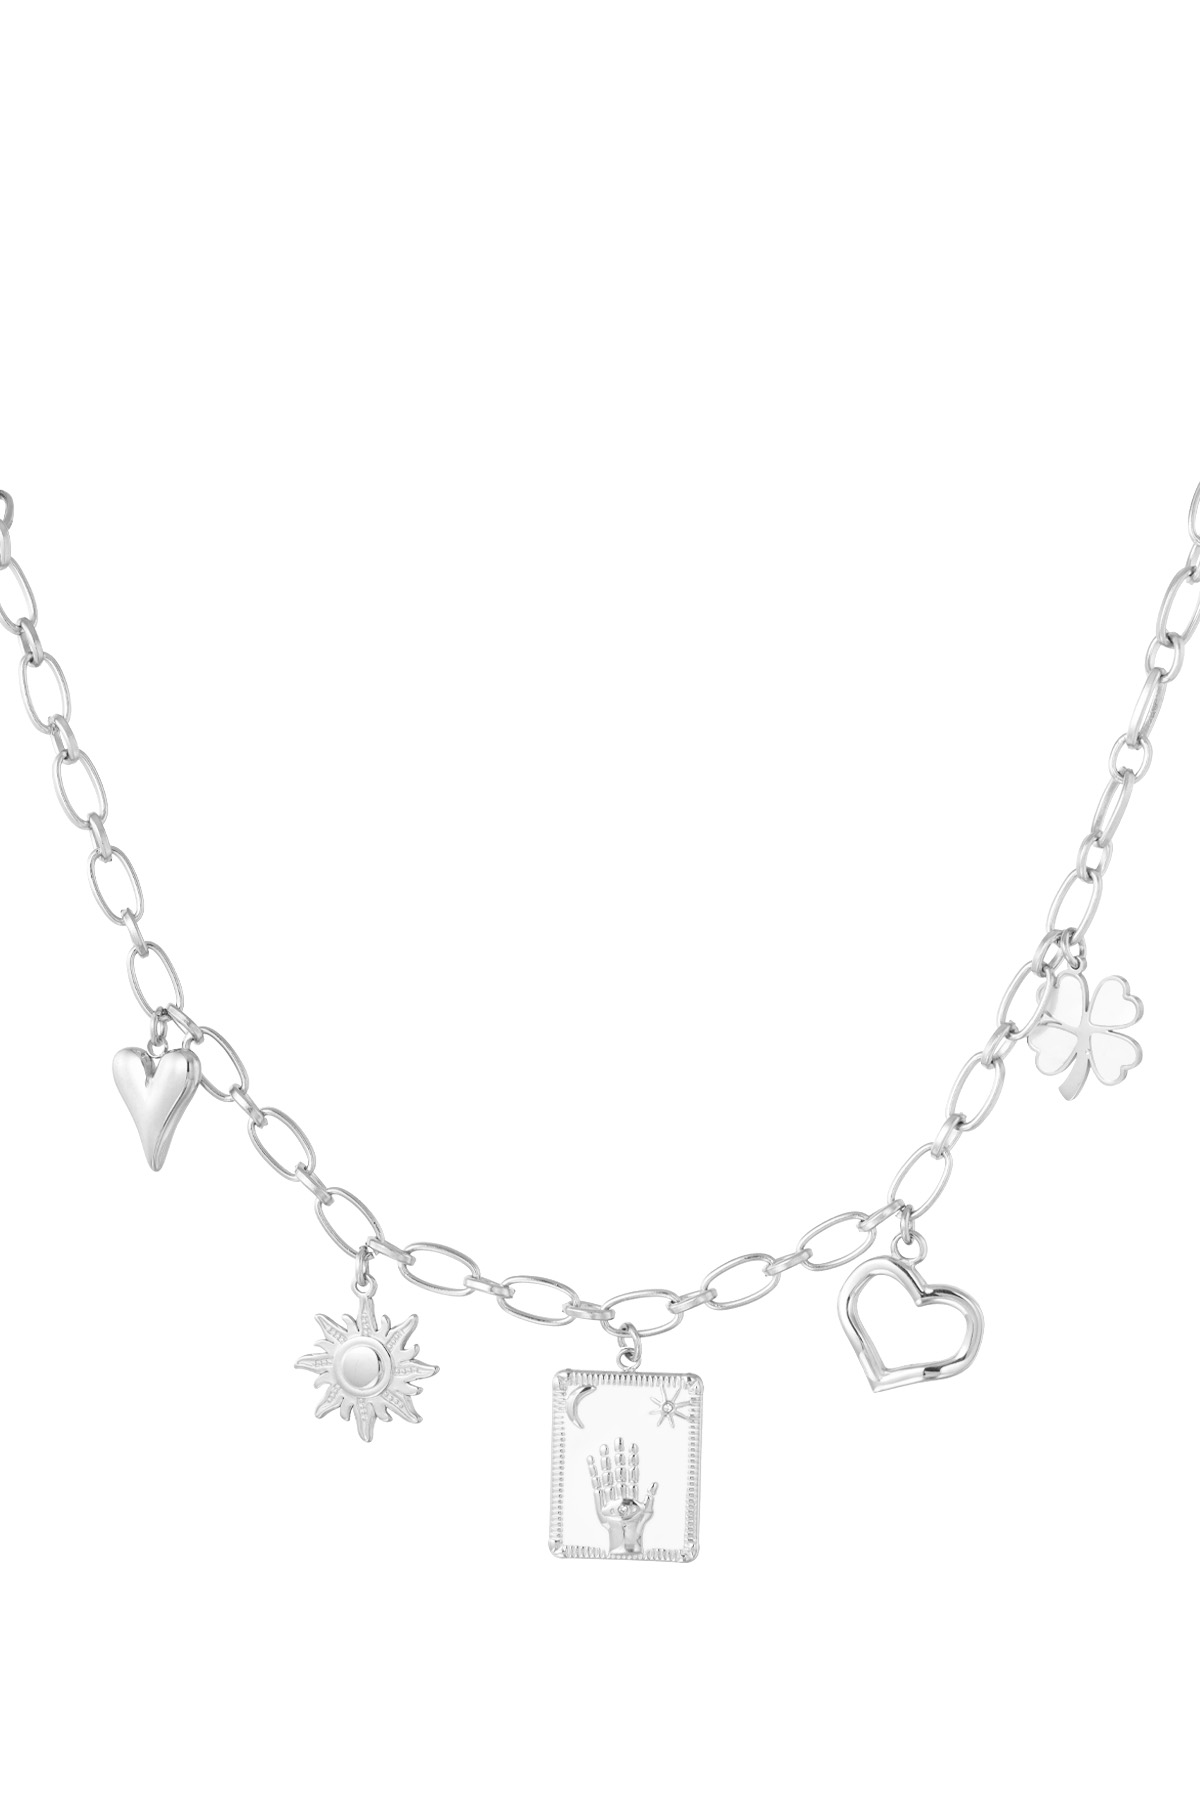 Charm necklace raise your hand - silver h5 